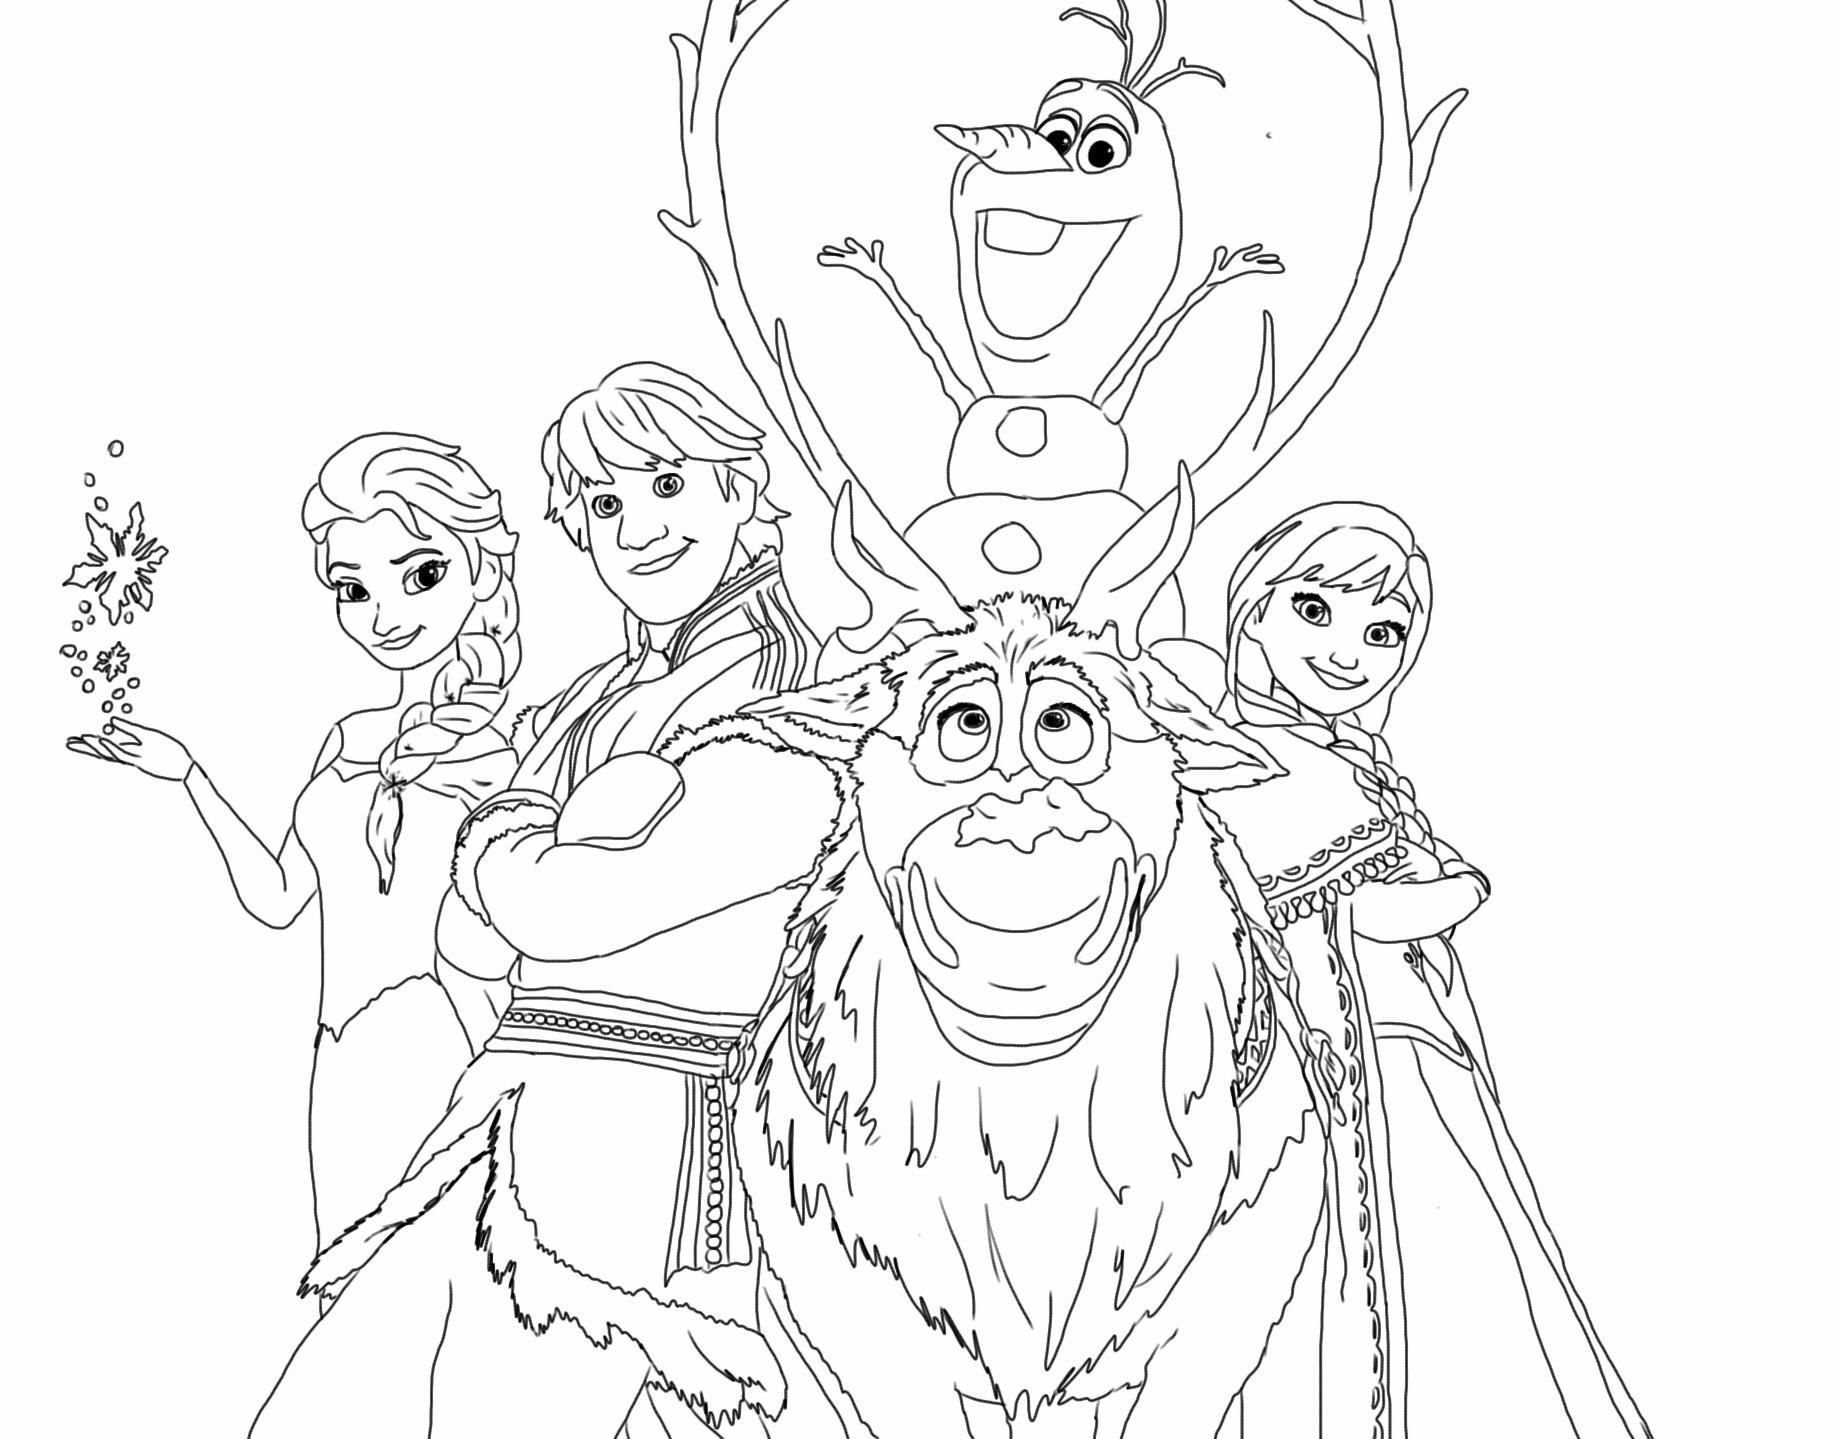 Elsa Christmas Coloring Pages at GetDrawings | Free download